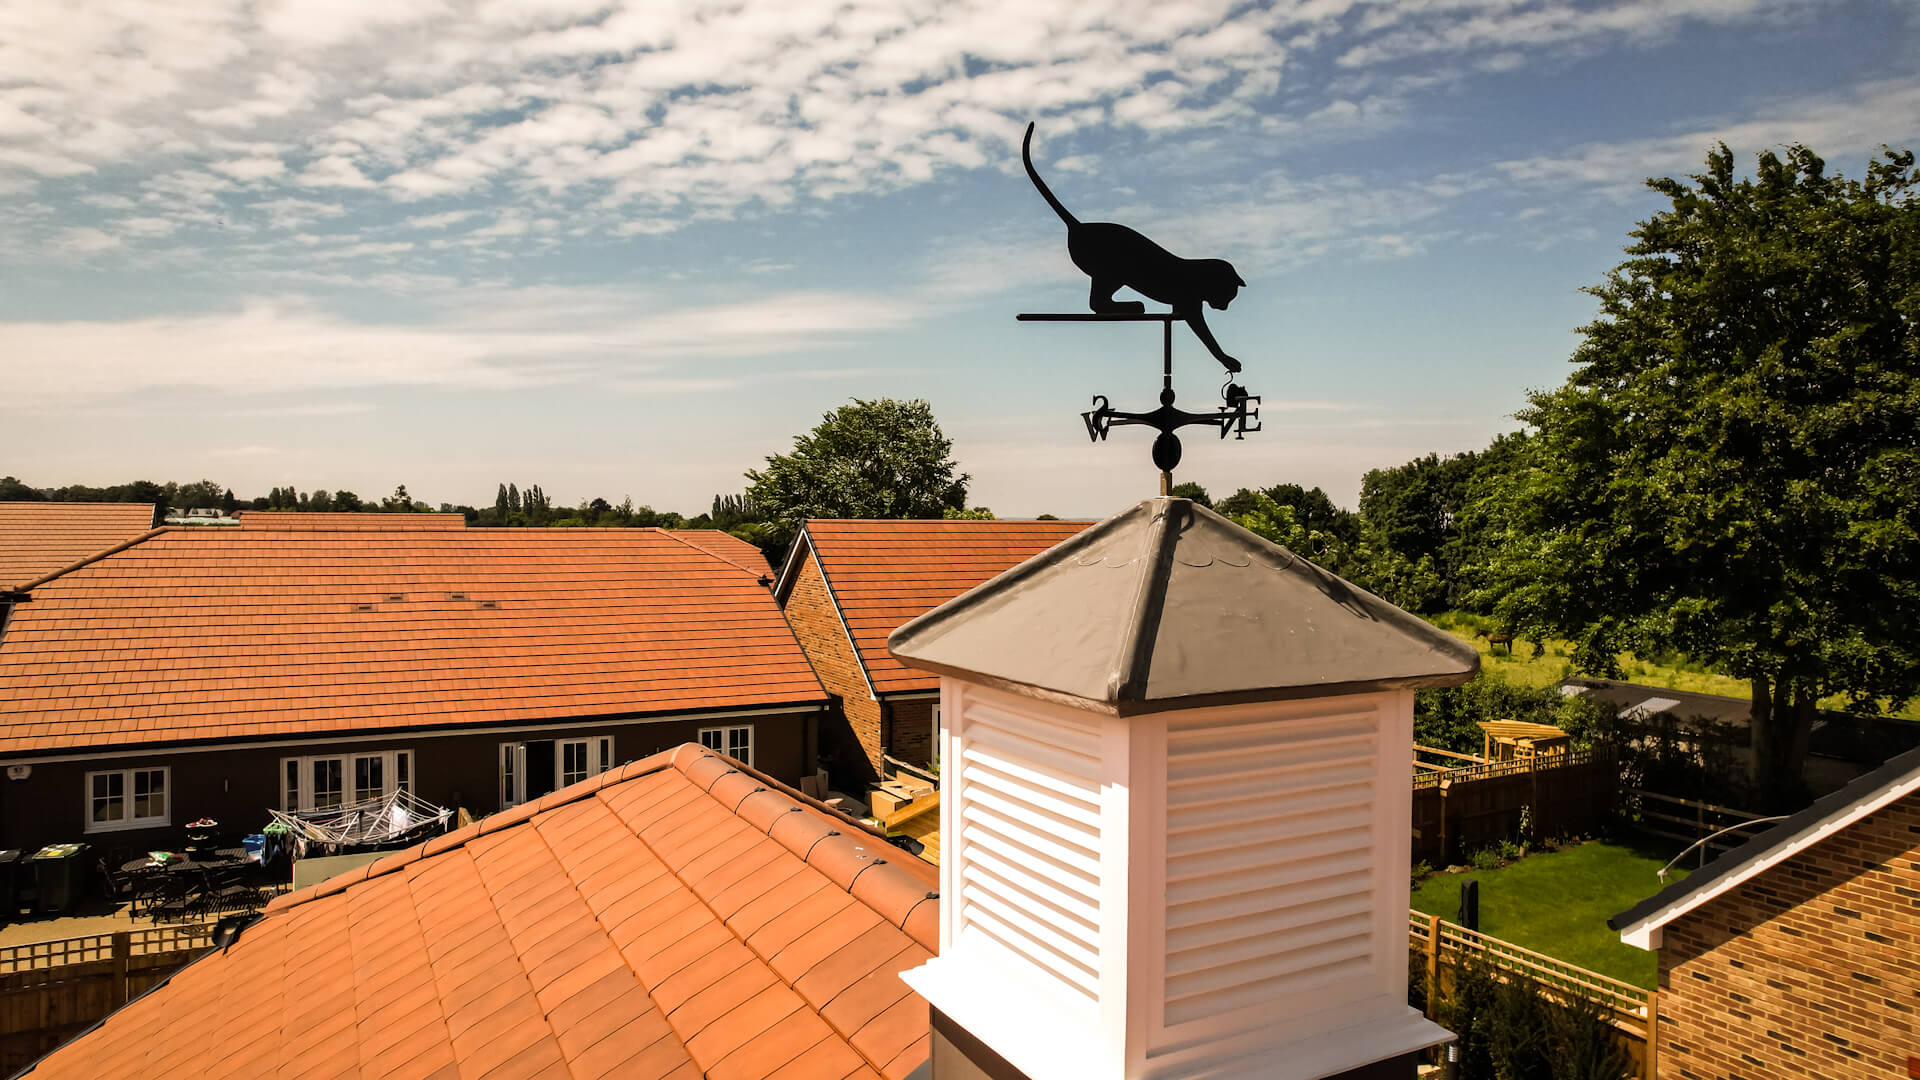 Cat and mouse weathervane at Cobnut Park